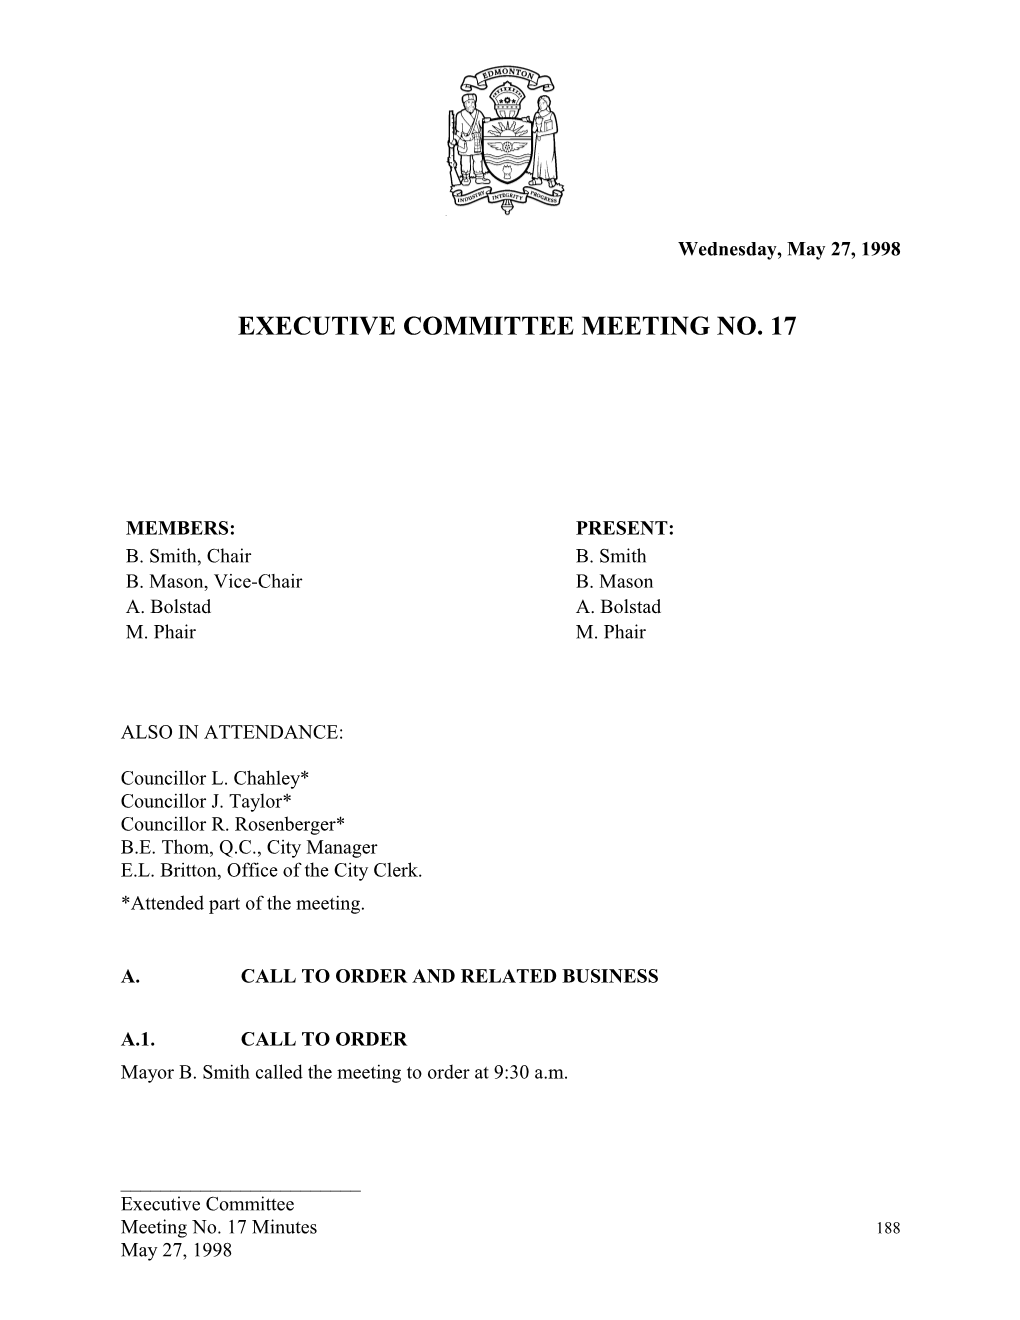 Minutes for Executive Committee May 27, 1998 Meeting